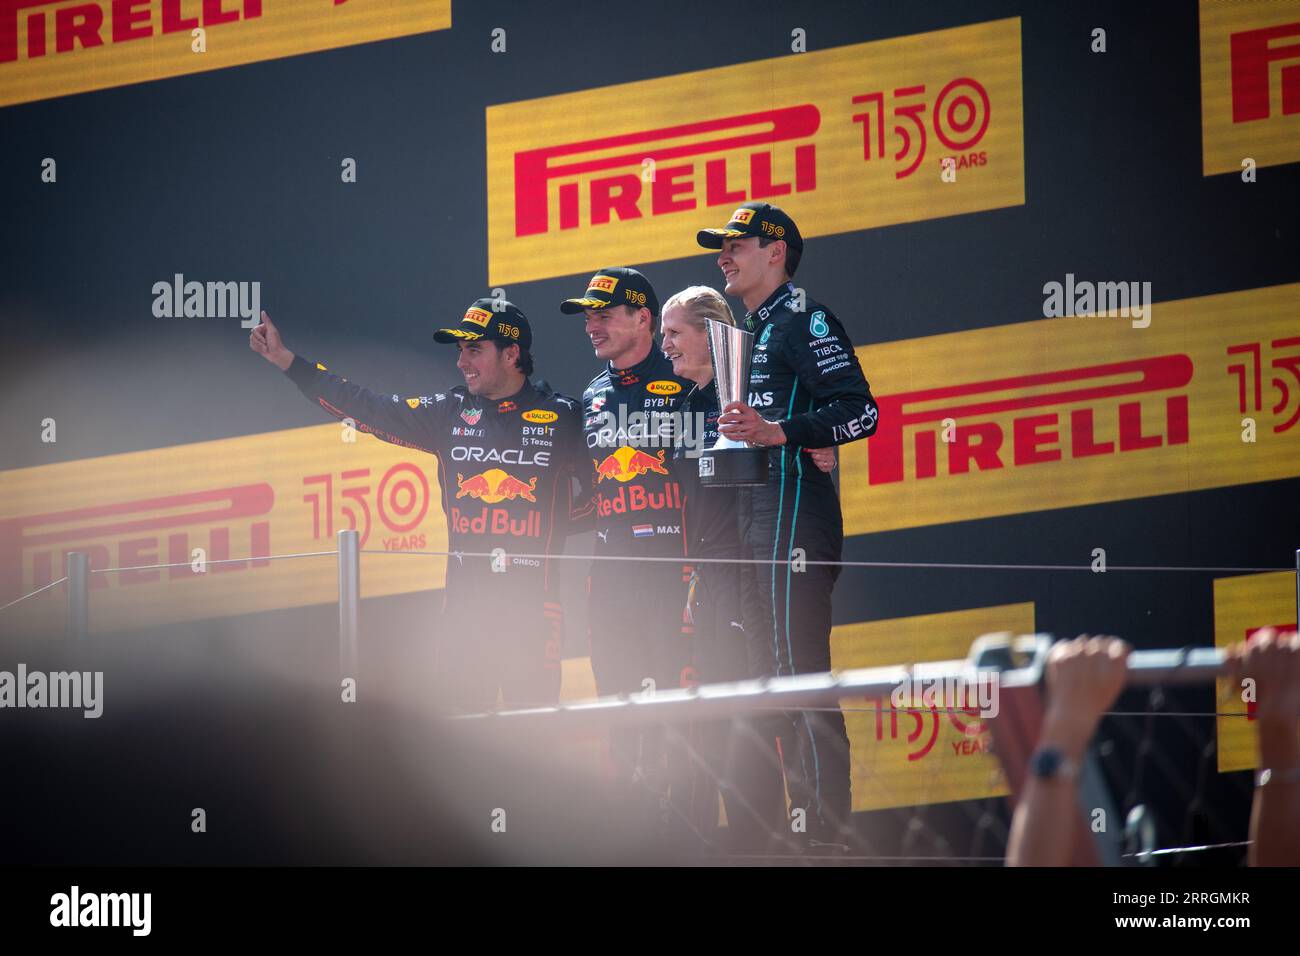 George Russell, Max Verstappen, and Sergio Perez stand together on the podium, following their wins at the Spanish Grand Prix. Stock Photo